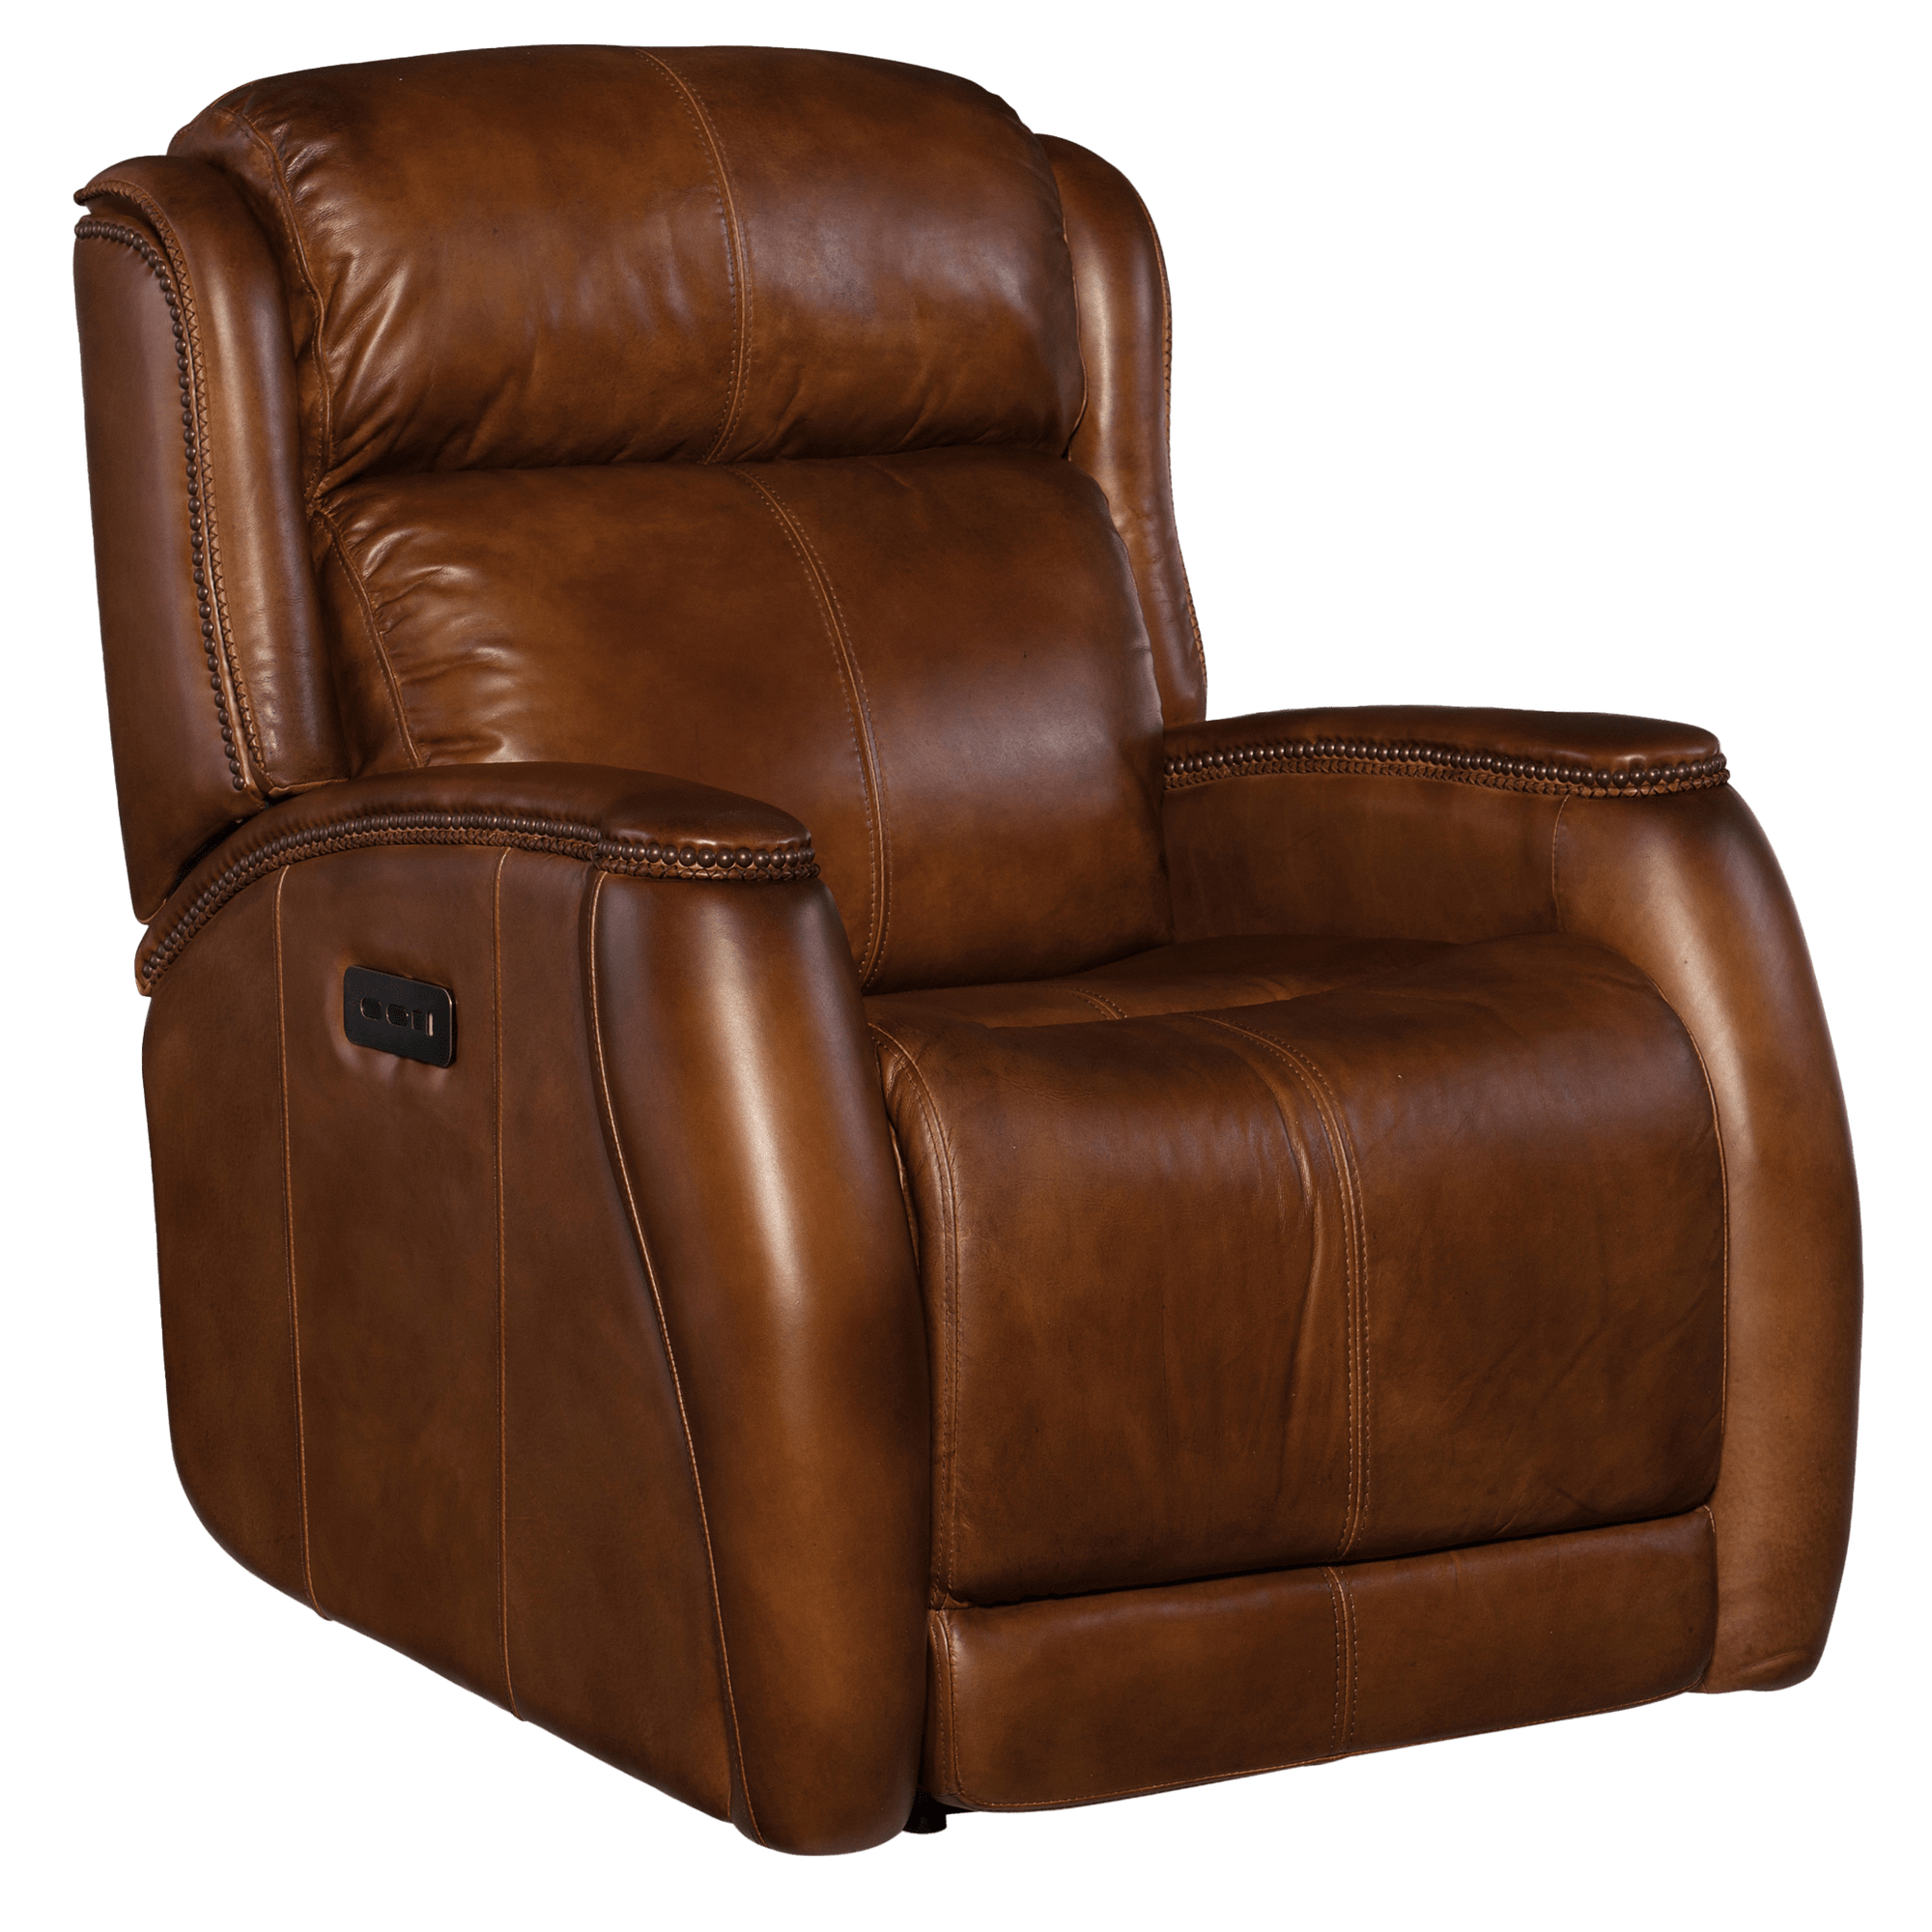 Ediva Power Recliner with Articulating Headrest, Leather, Brown - Coja